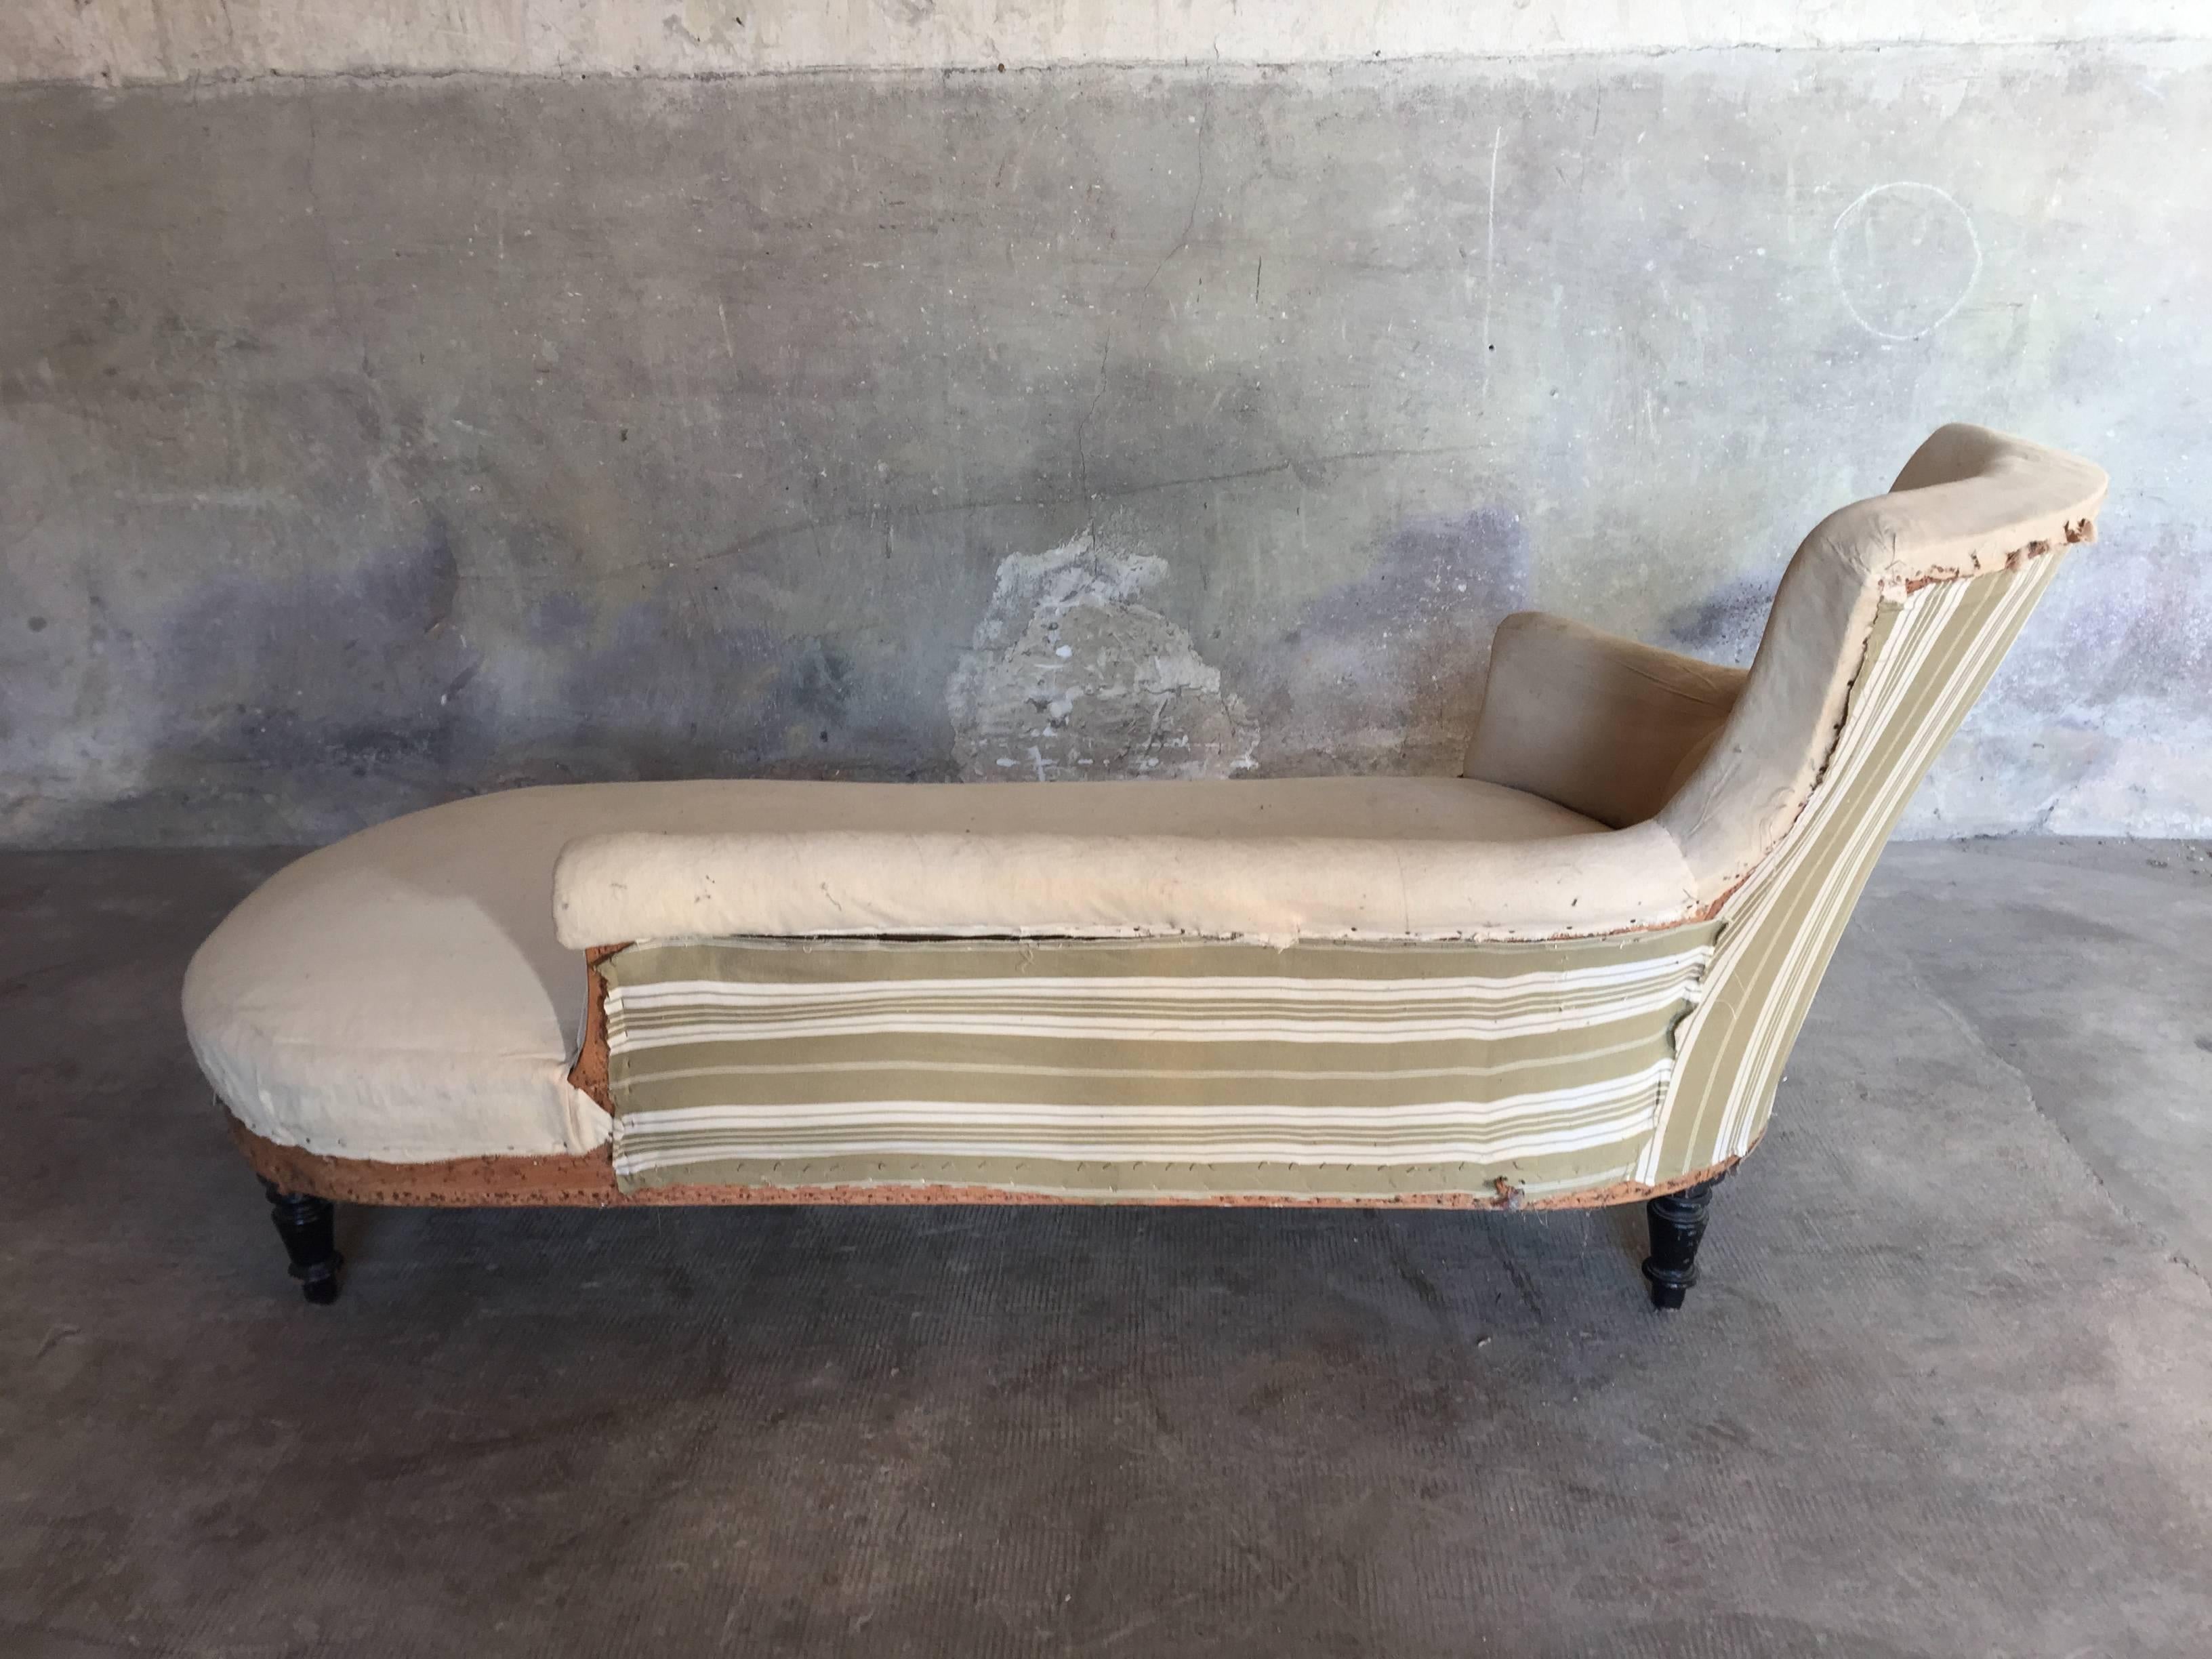  tall and nice shape for this French Napoleon III meridienne ,perfect condition and ready to be reupholstered

Dim = Hback 83 / H seat 42 x 195 x 84 cm